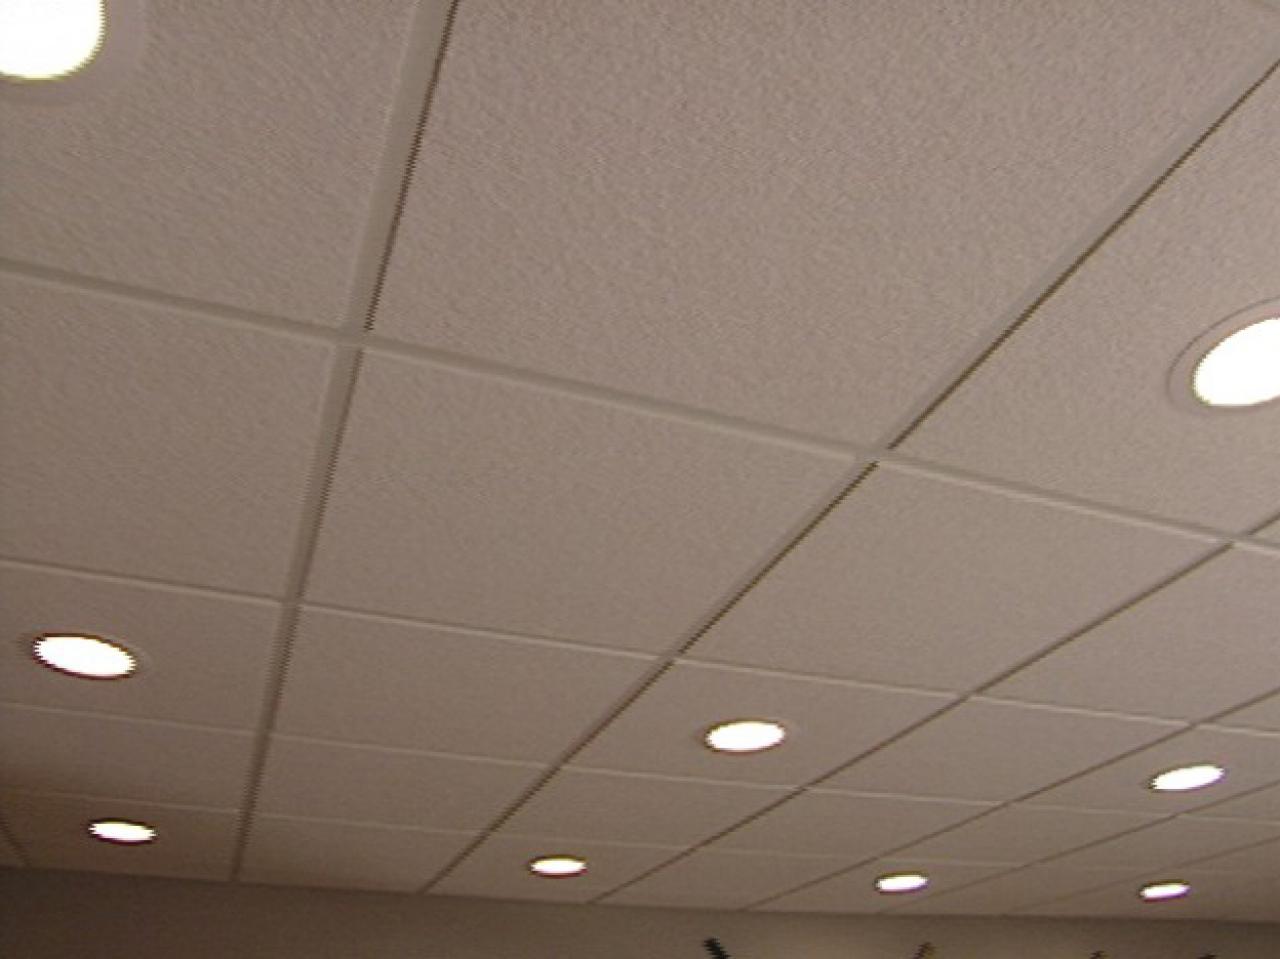 Suspended ceiling grid light panels - Enhancing the look of your room